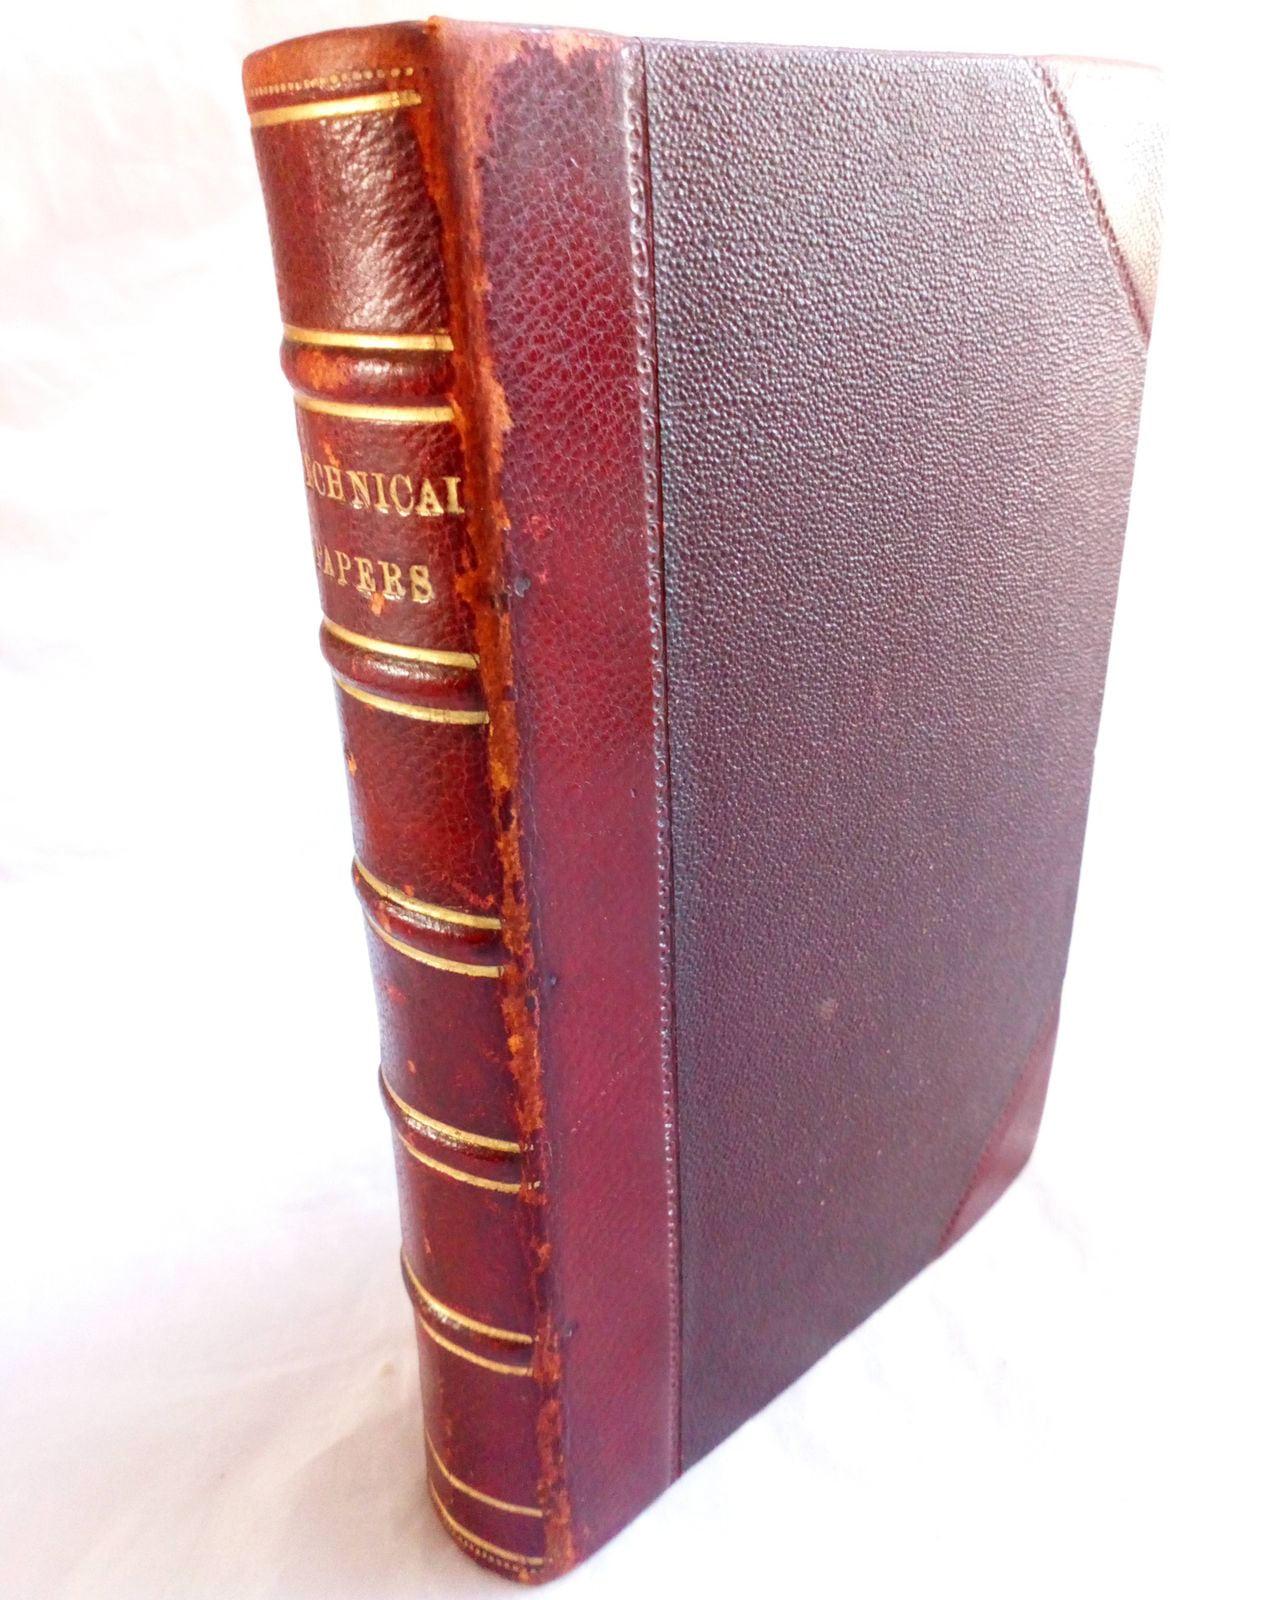 Antiquarian Half Leather Bound Book Technical Papers Naval Architecture Marine Engineering articles dating from around 1890